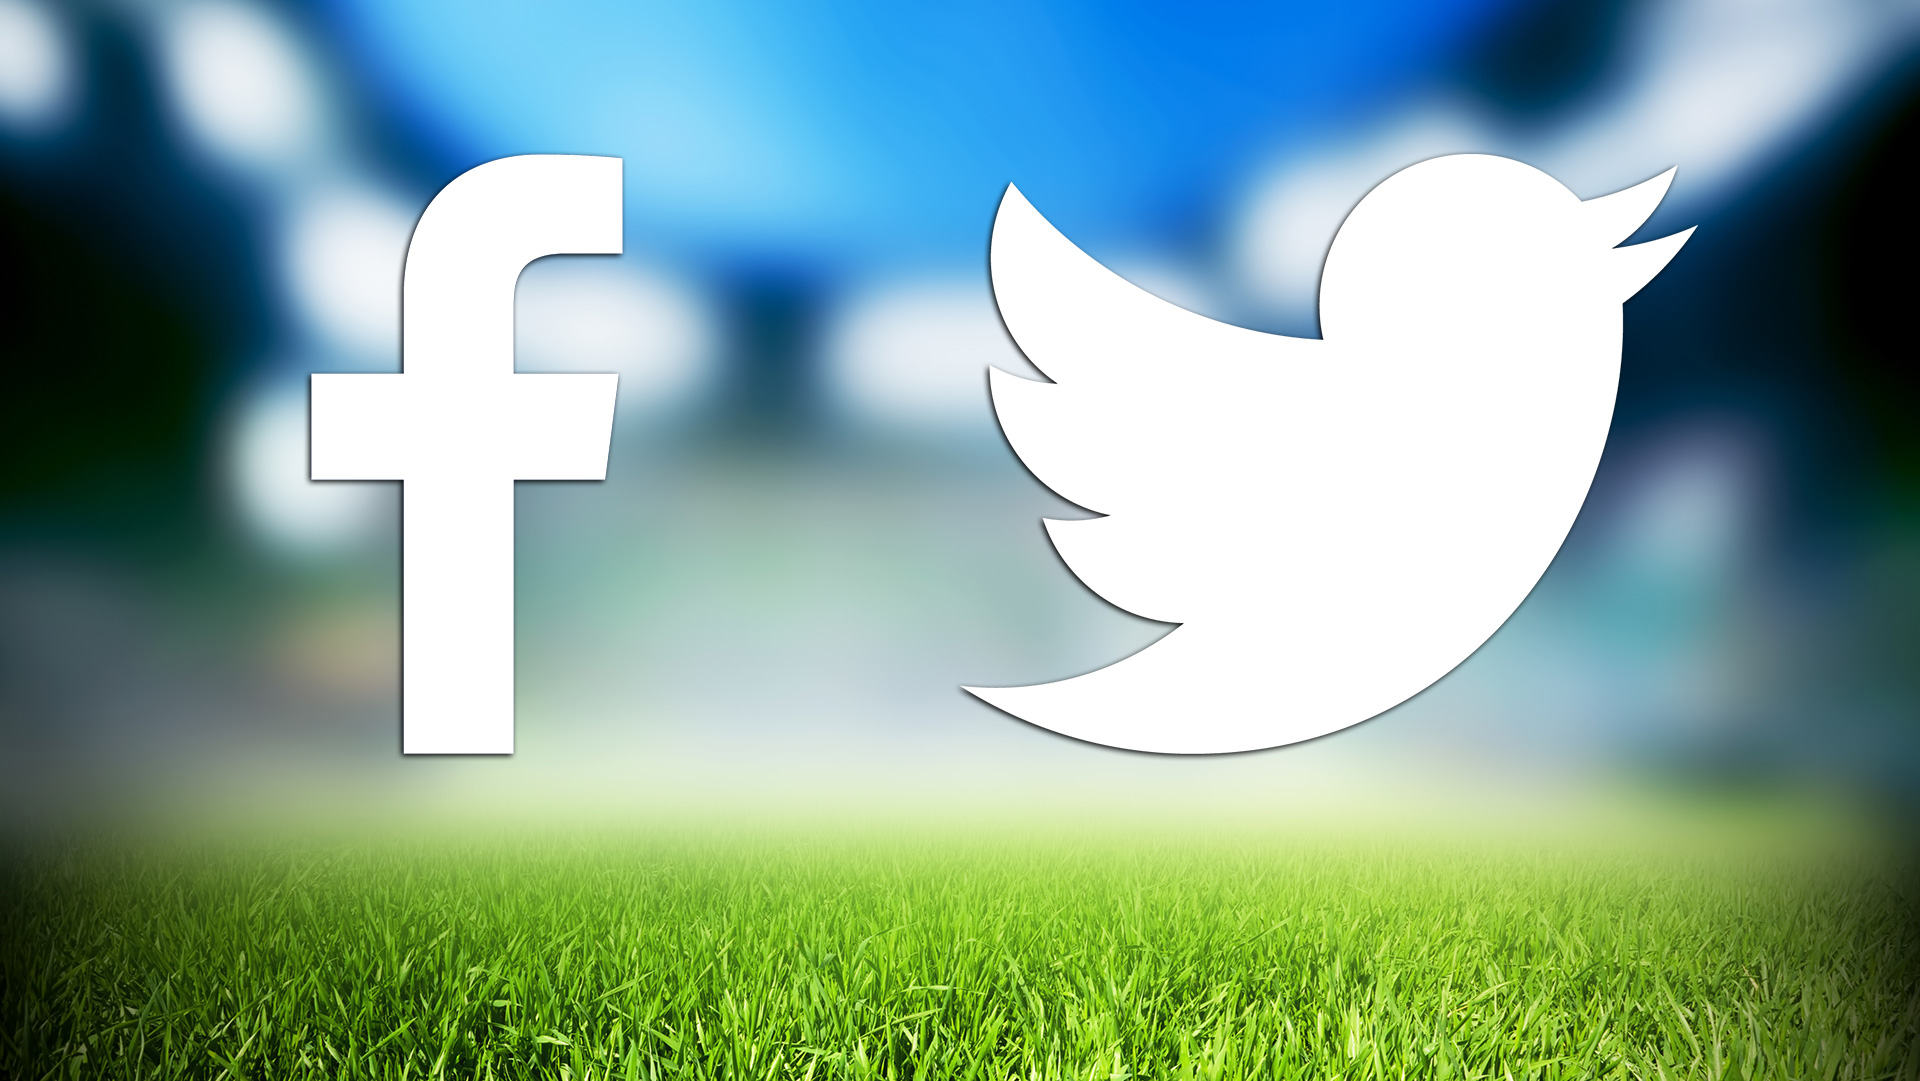 Super Bowl-related social activity was up Sunday on both Facebook & Twitter